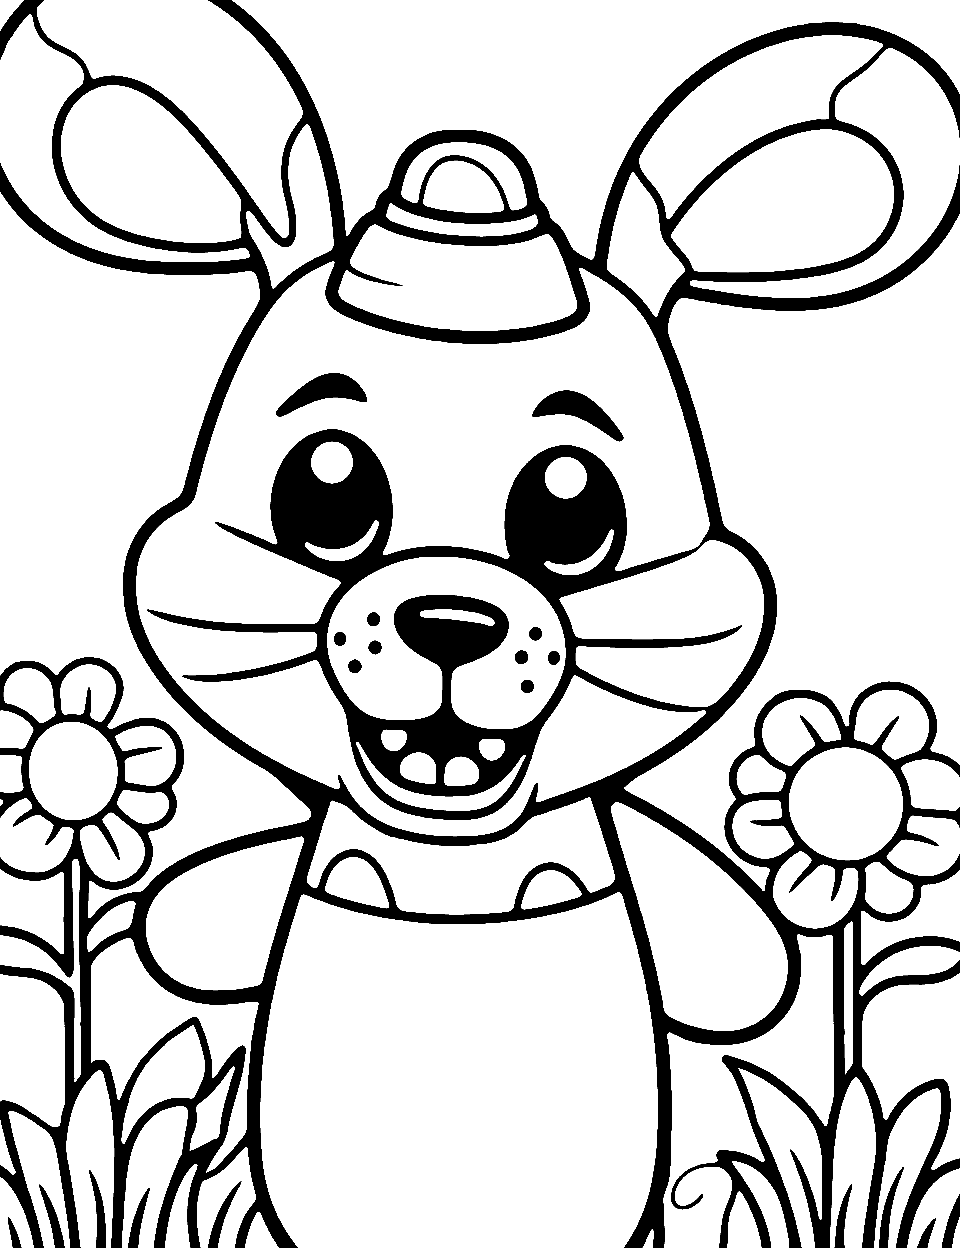 Spring Bonnie Five Nights at Freddys Coloring Page - Spring Bonnie in a meadow with simple flowers.